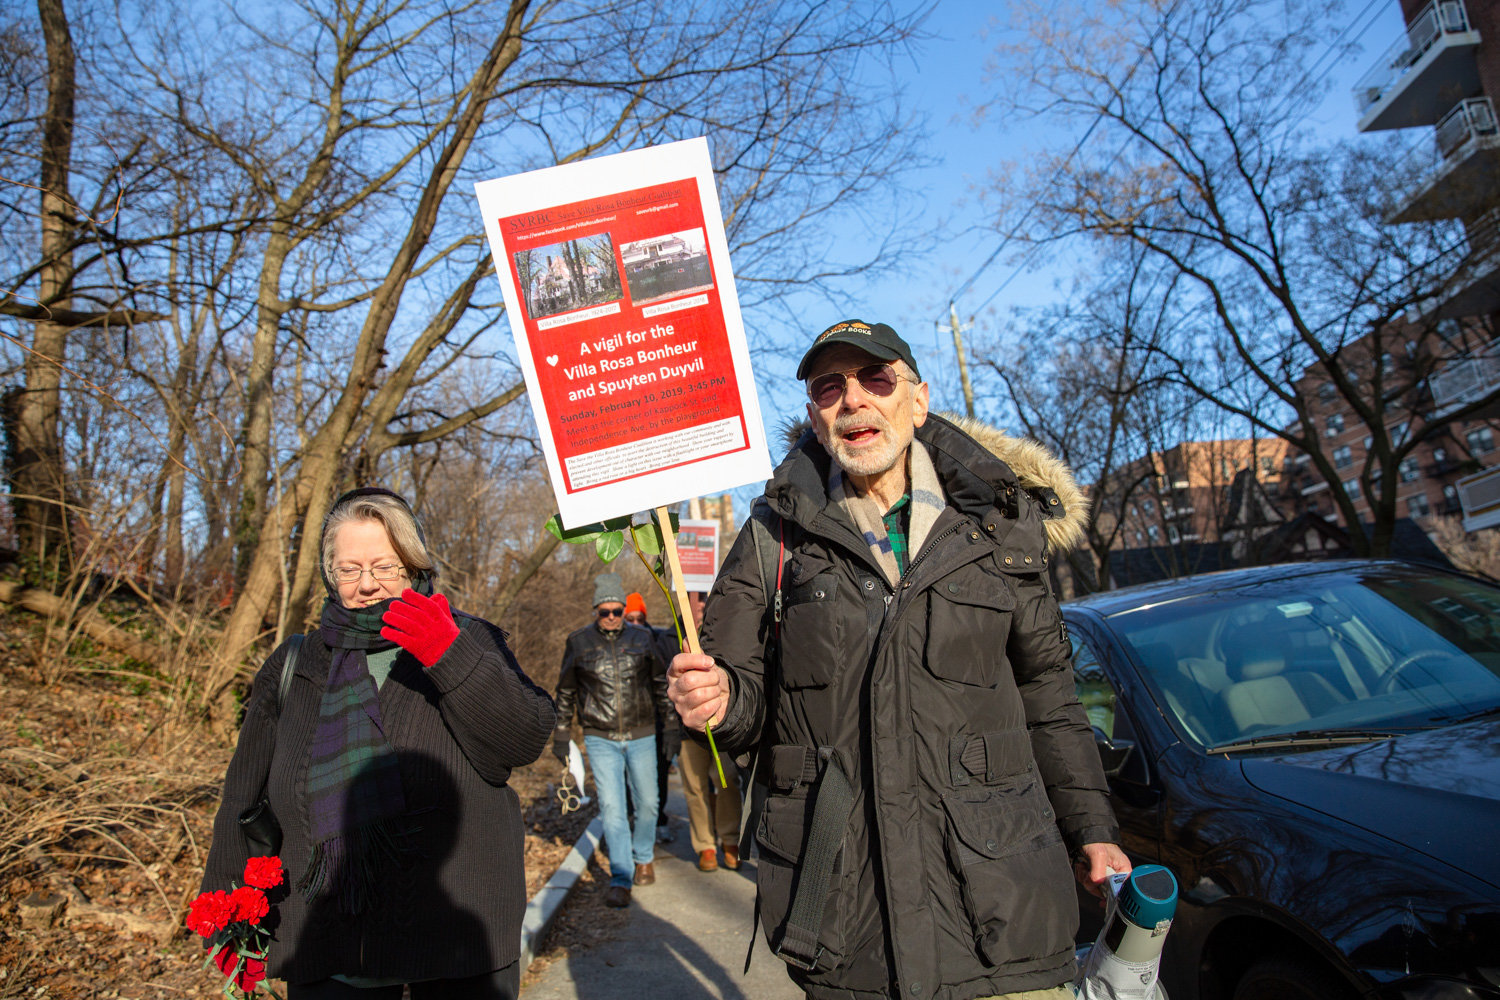 Perry Brass, right, and Jennifer Scarlott lead a group of community members toward the Villa Rosa Bonheur for a vigil in support of the historic apartment building in February. Brass lives in the Villa Rosa’s sister building, Villa Charlotte Bronte.